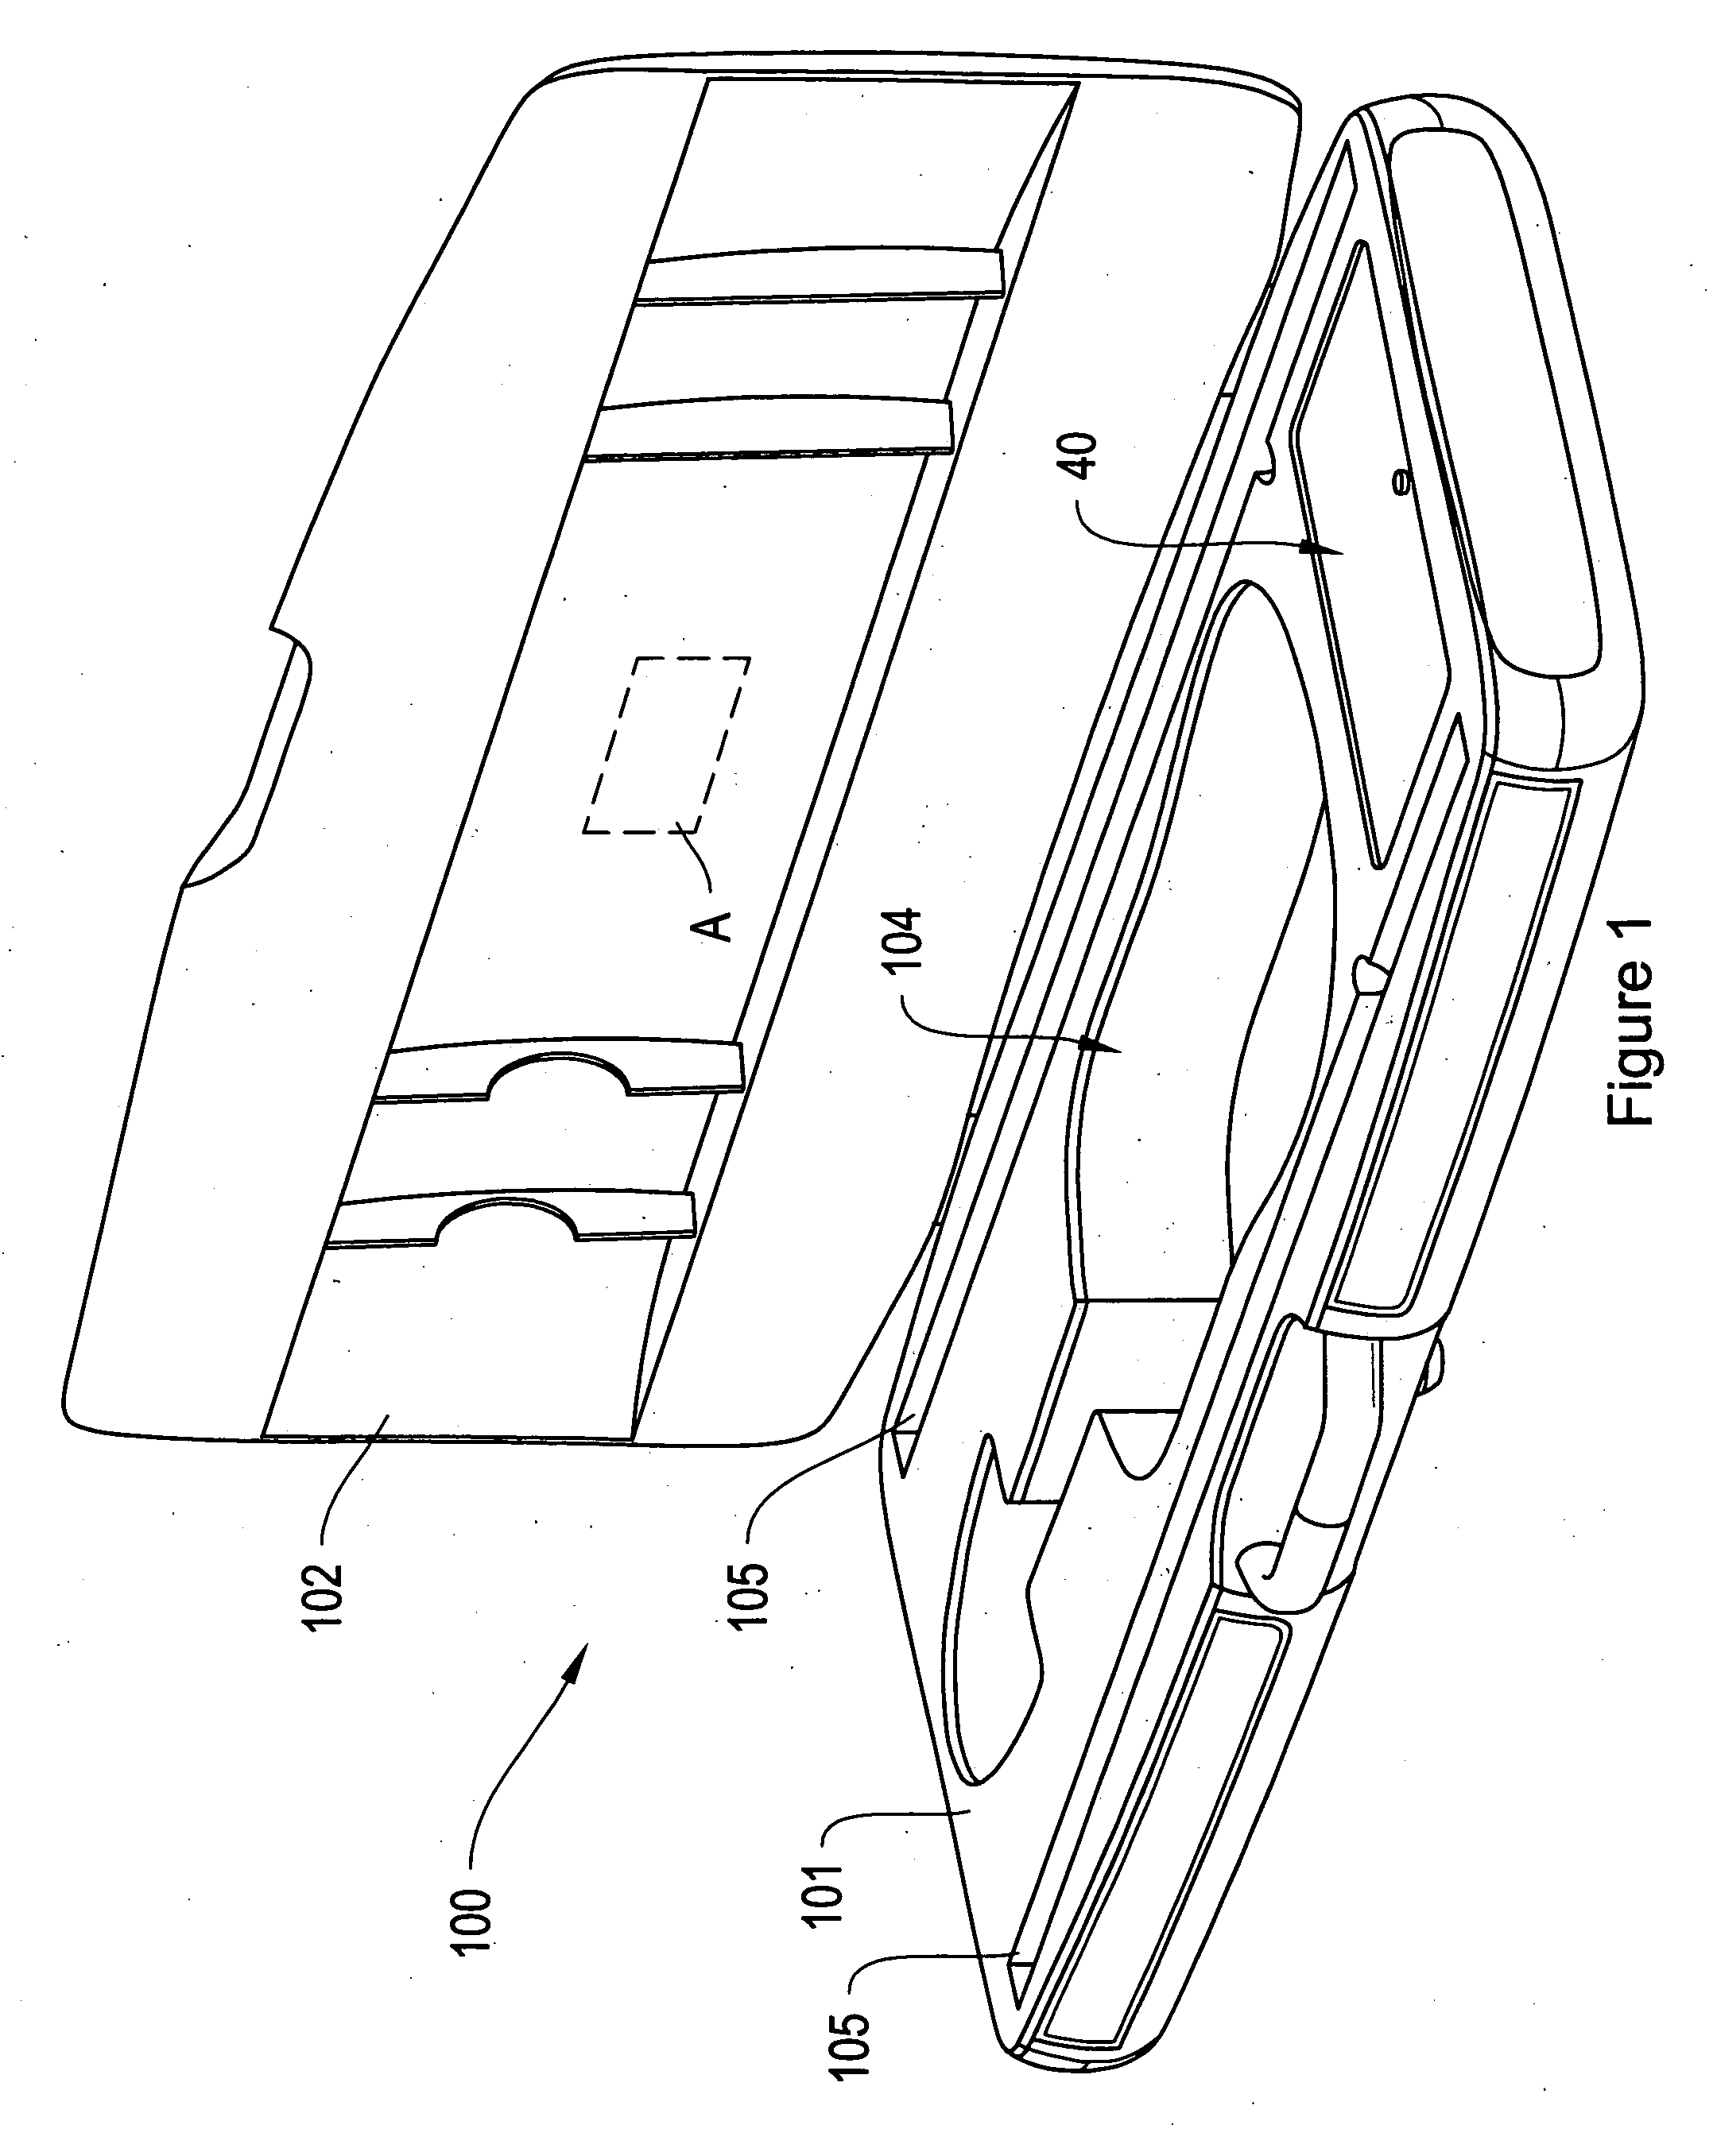 Safe instrument case and protection devices